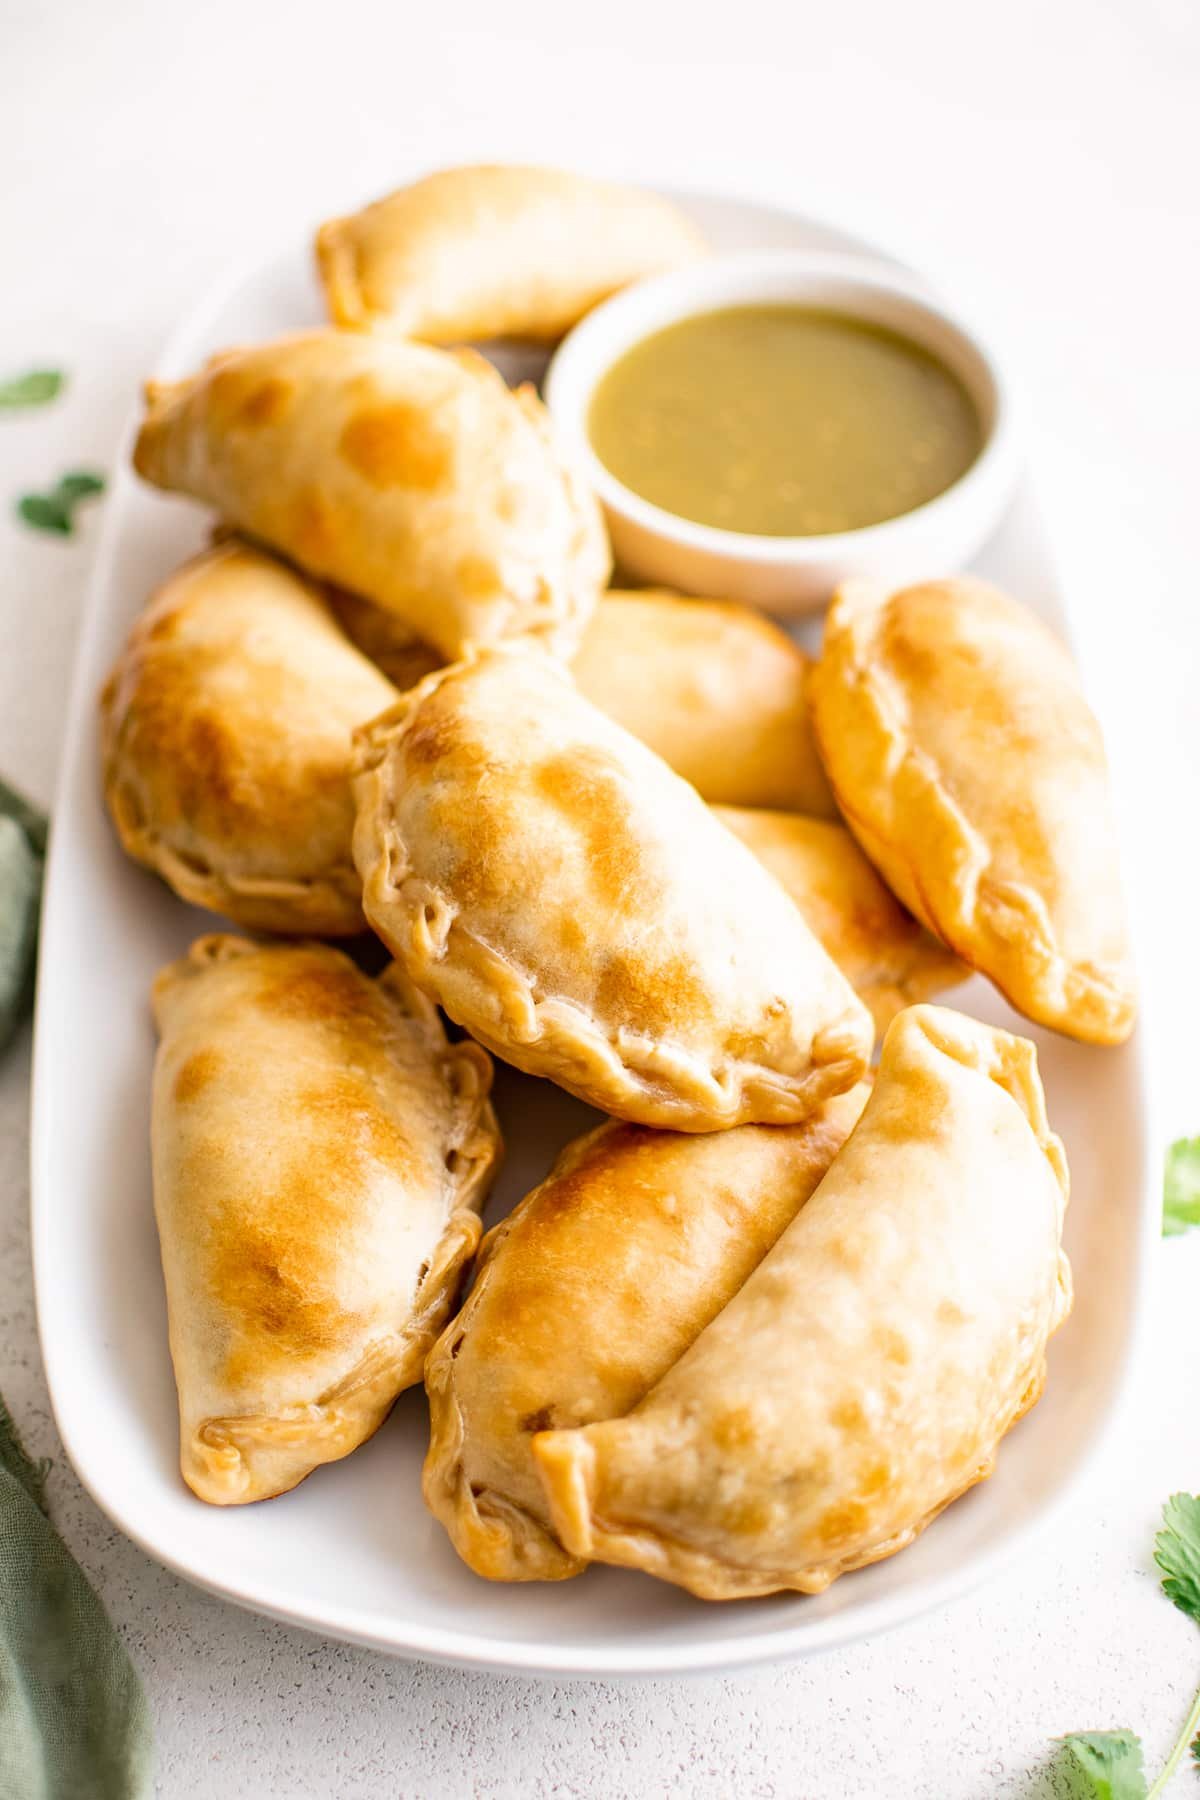 A large oval plate piled with golden baked beef empanadas.